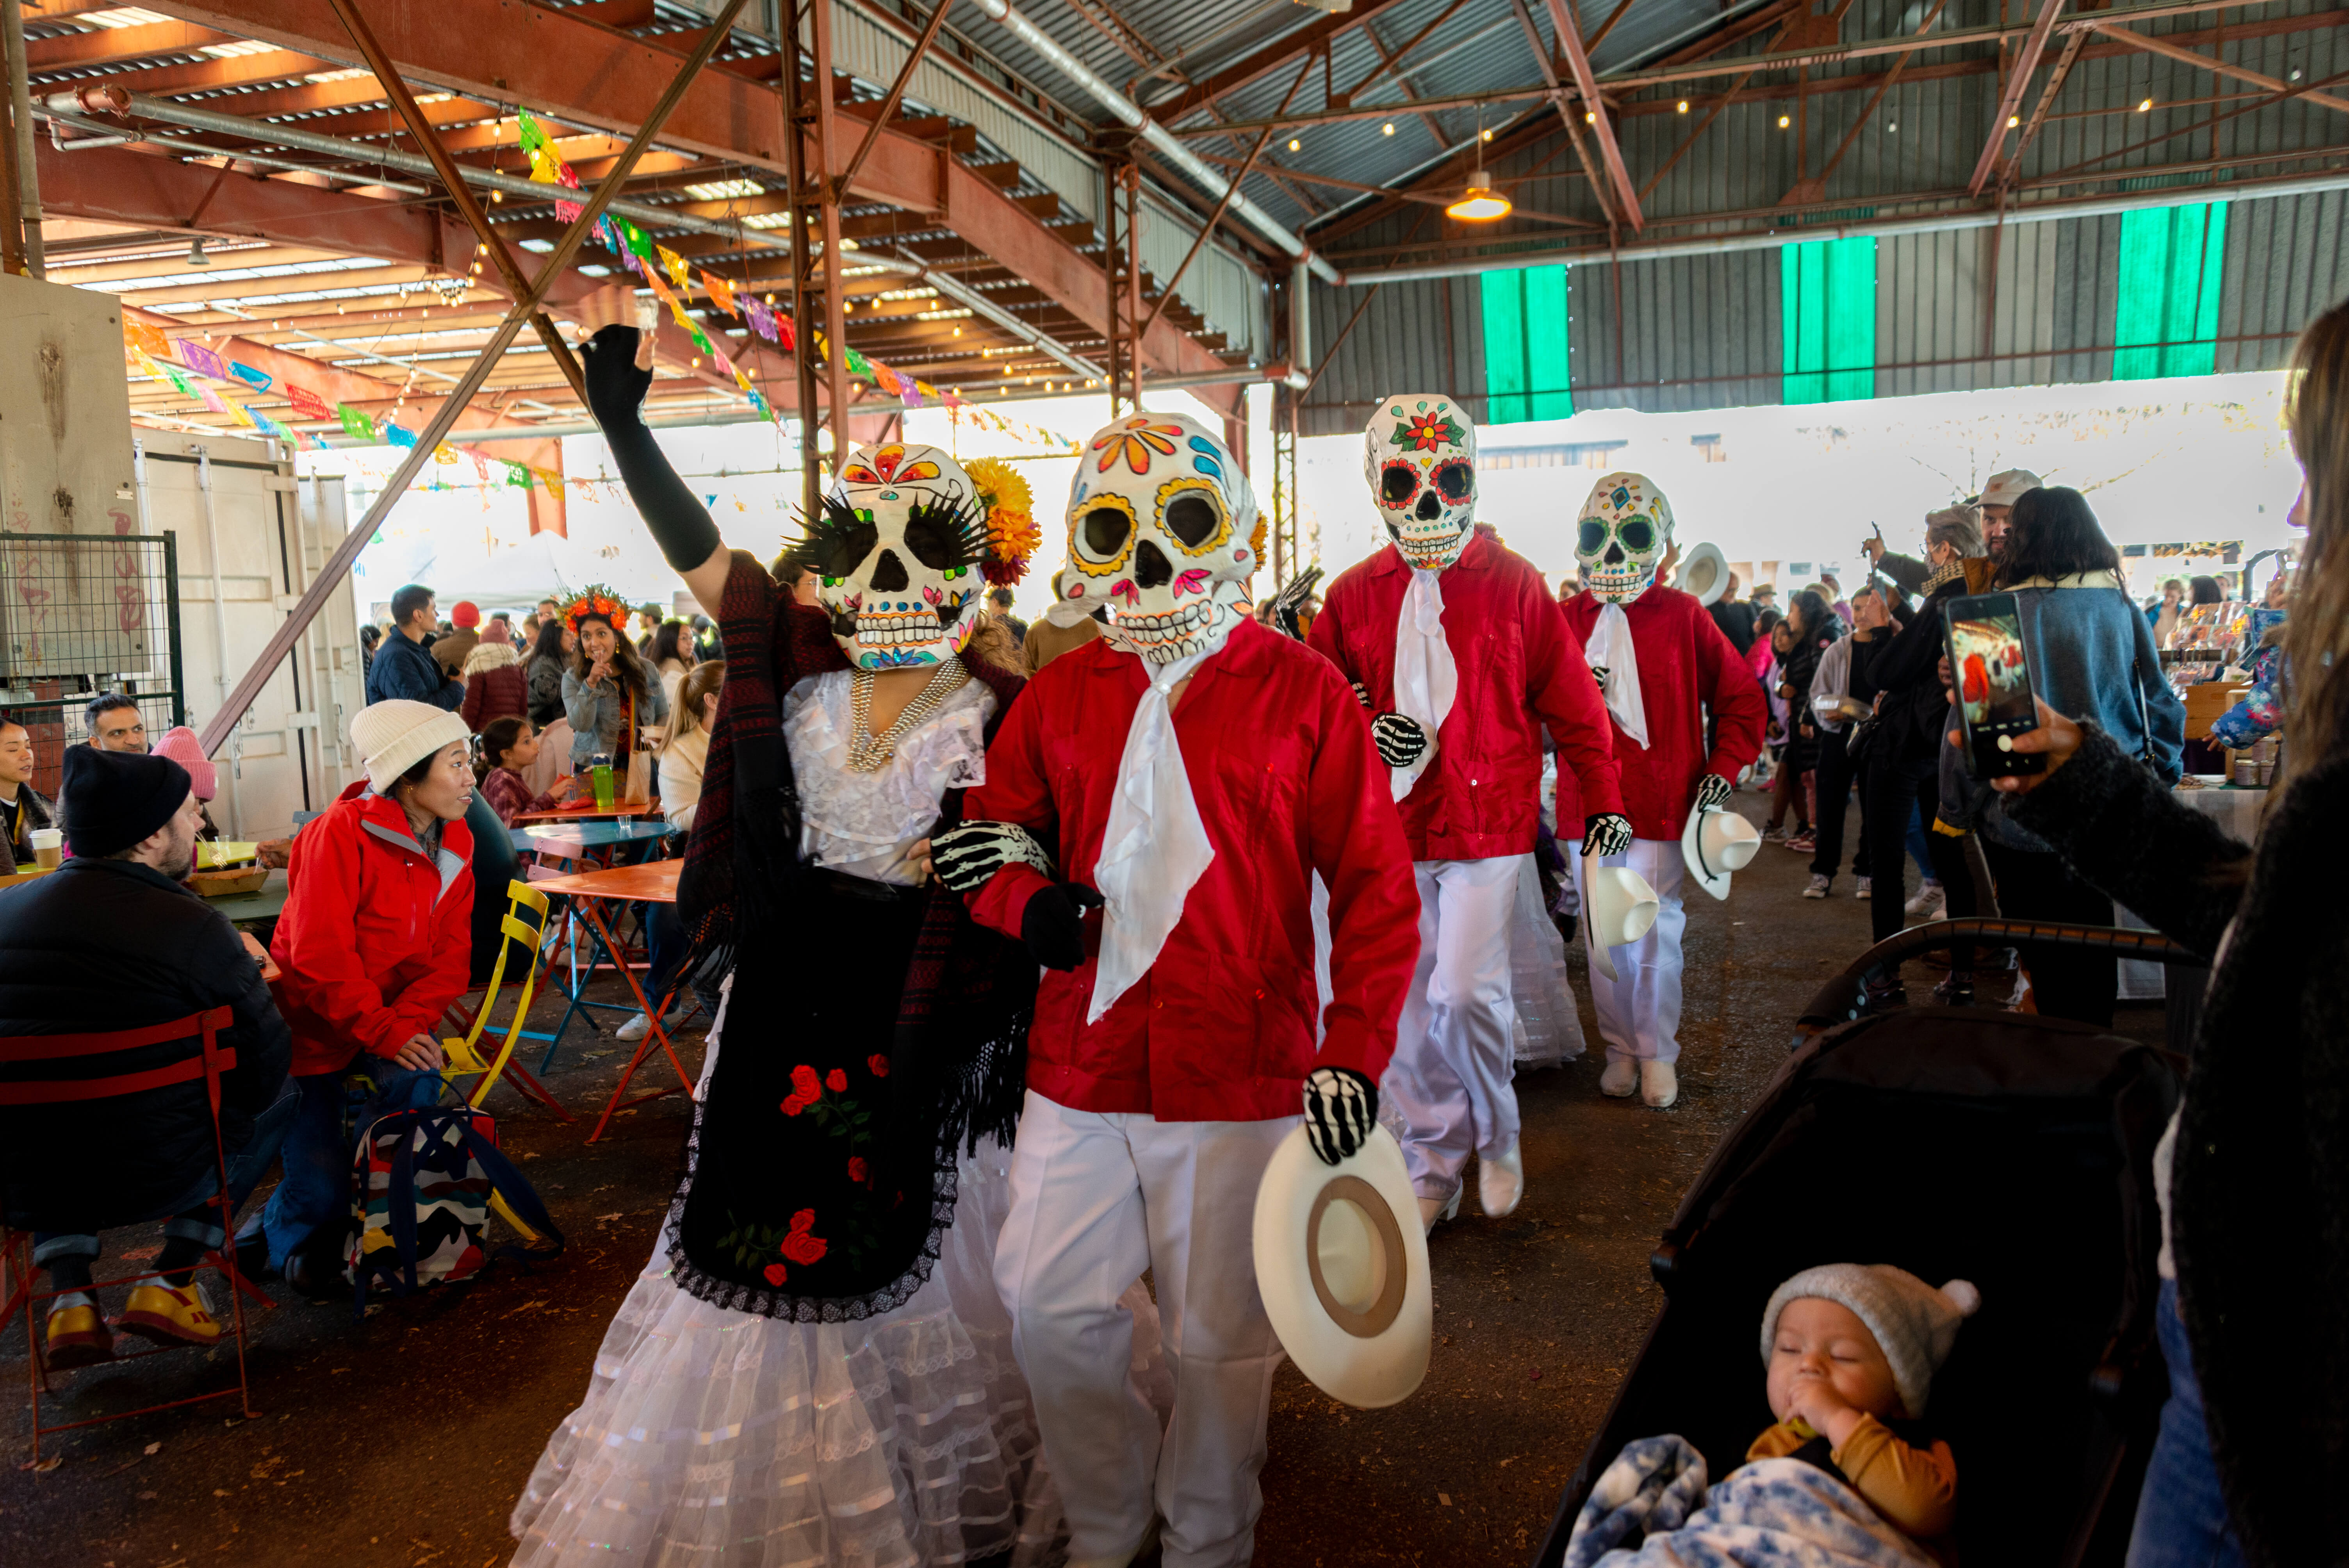 Day of the Dead celebrations at Brick Works with people dancing in costumes